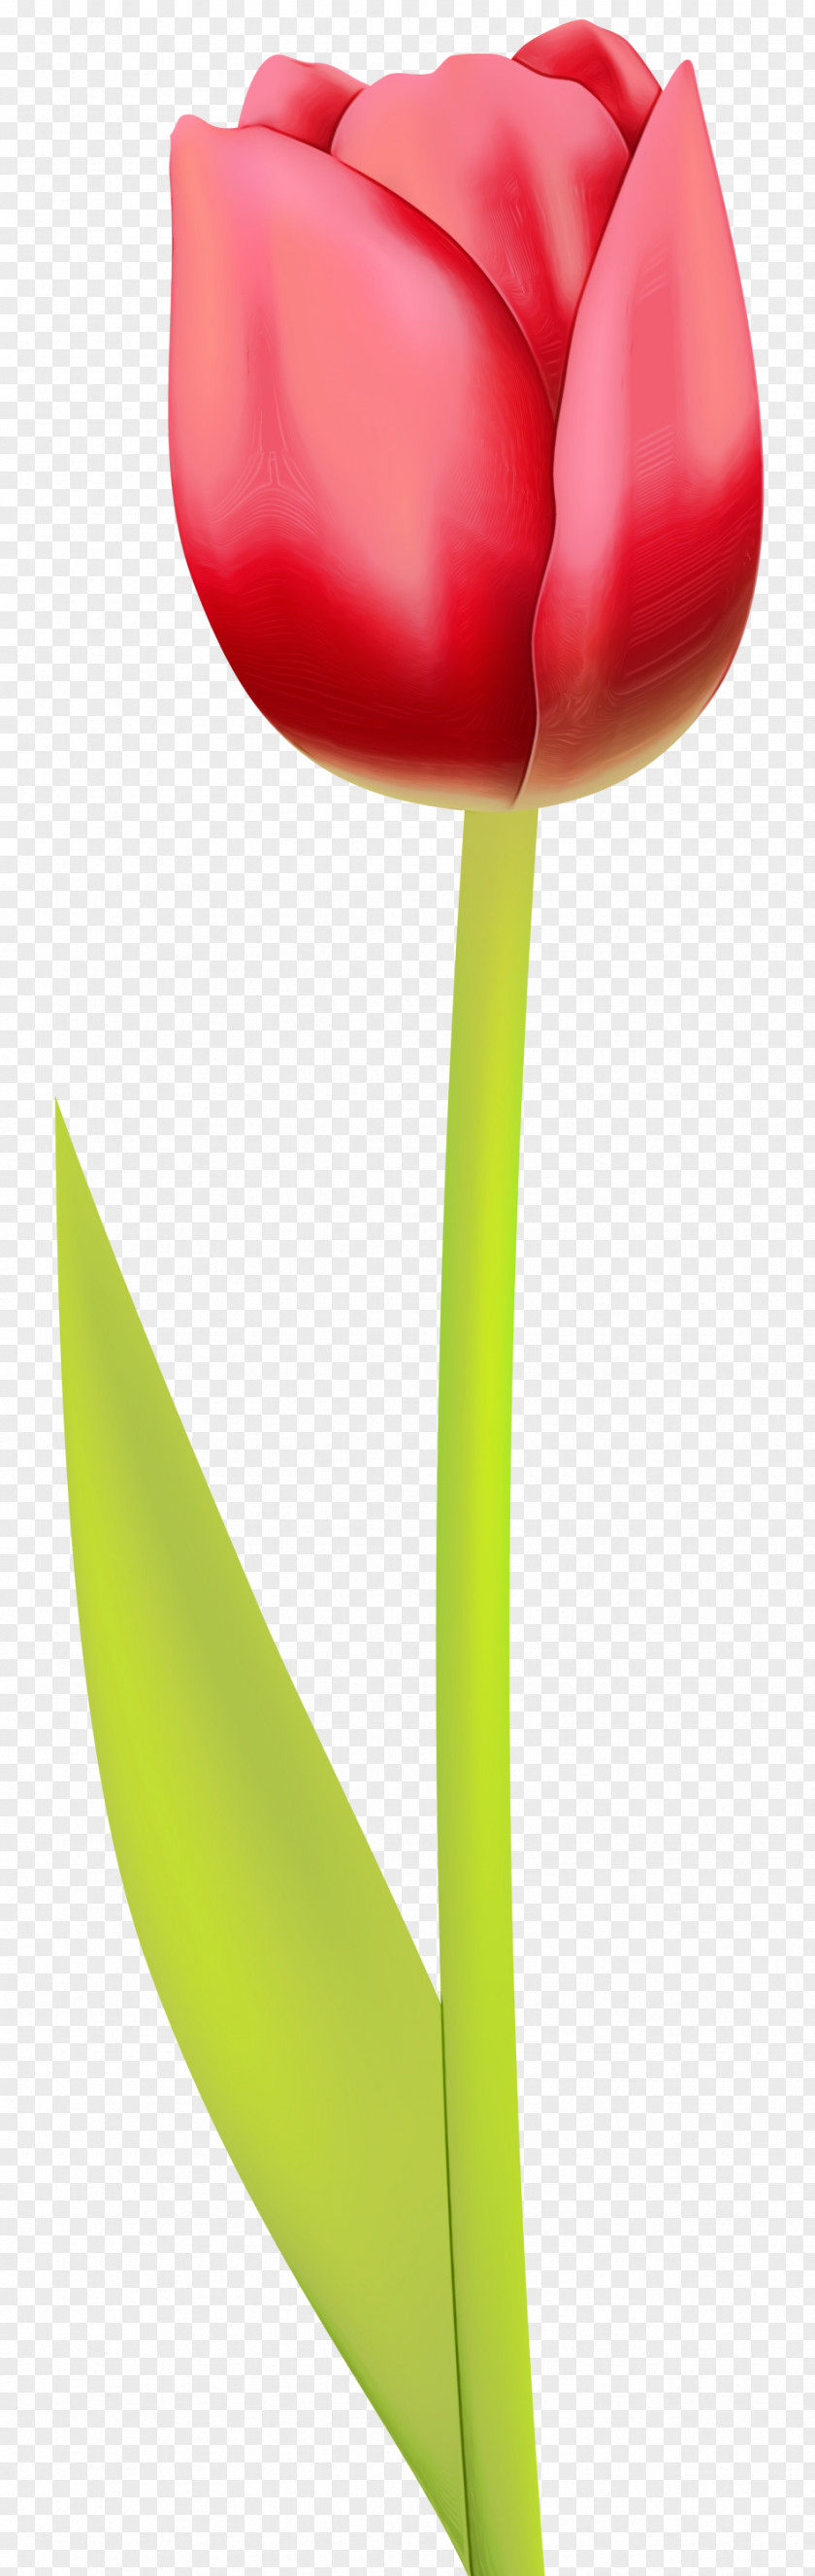 Plant Stem Lily Family Tulip Yellow Flower PNG